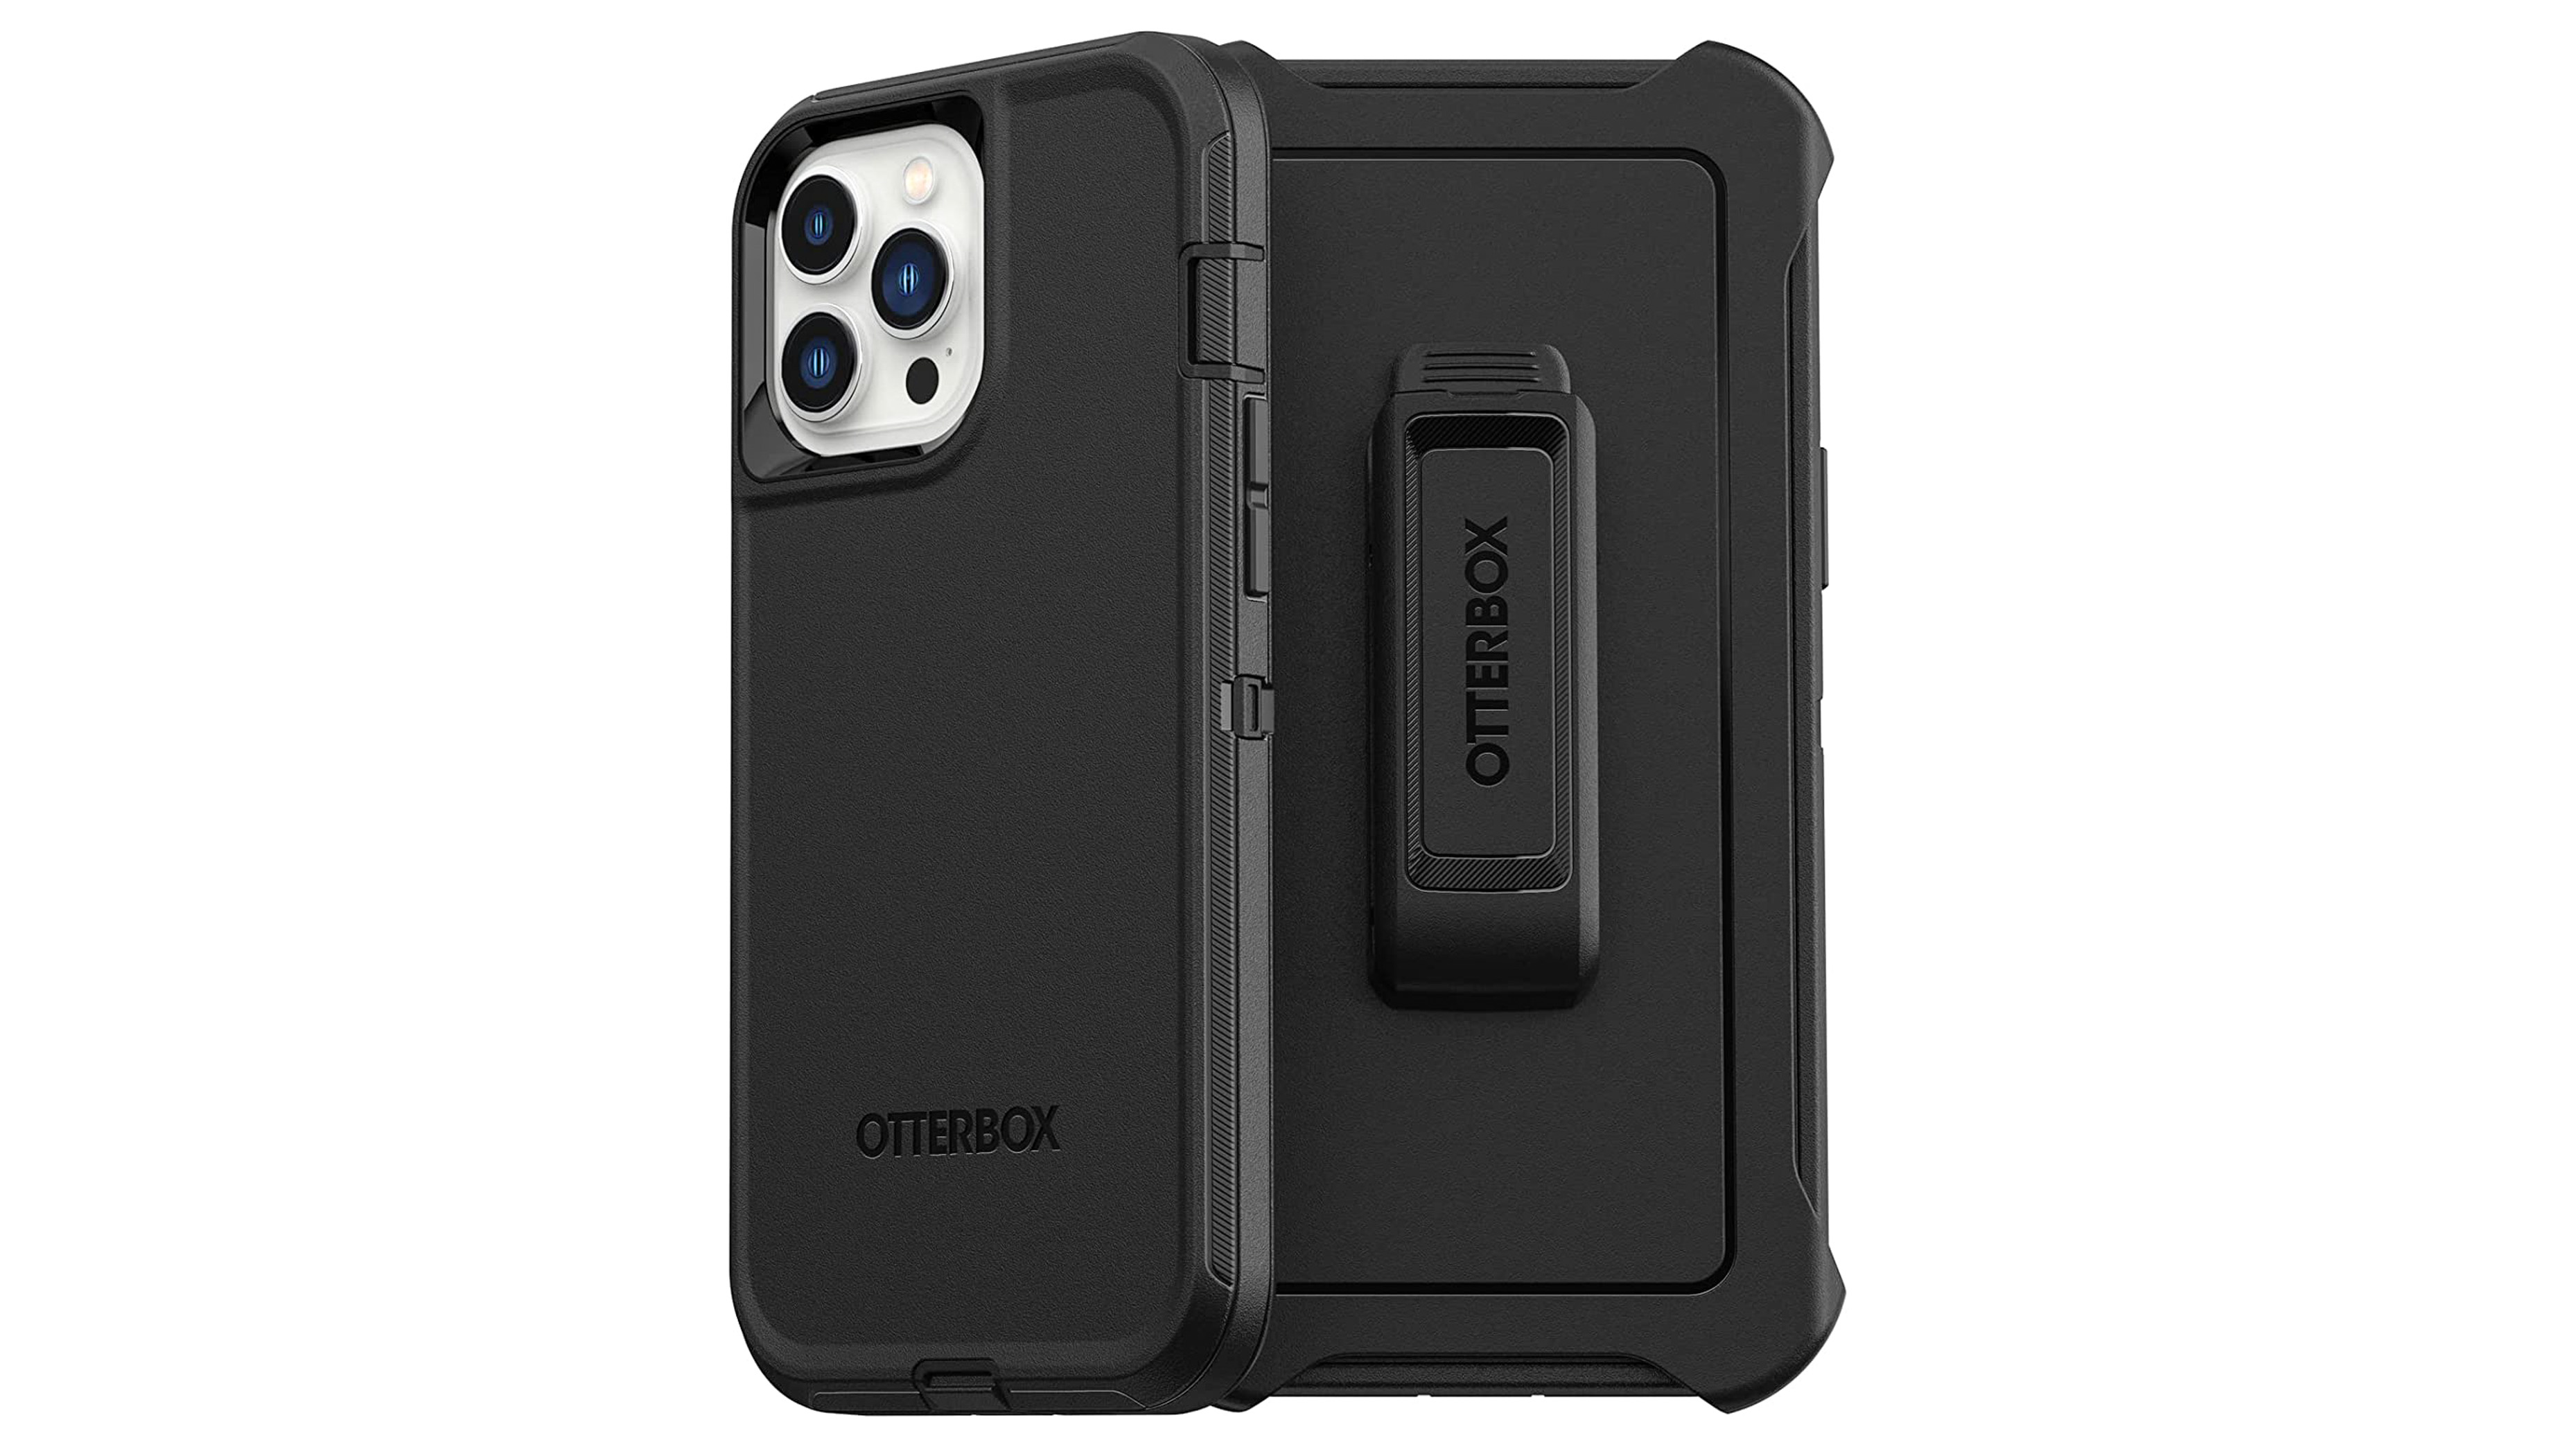 Best iPhone 13 Pro Max case: OtterBox Defender Series Screenless edition